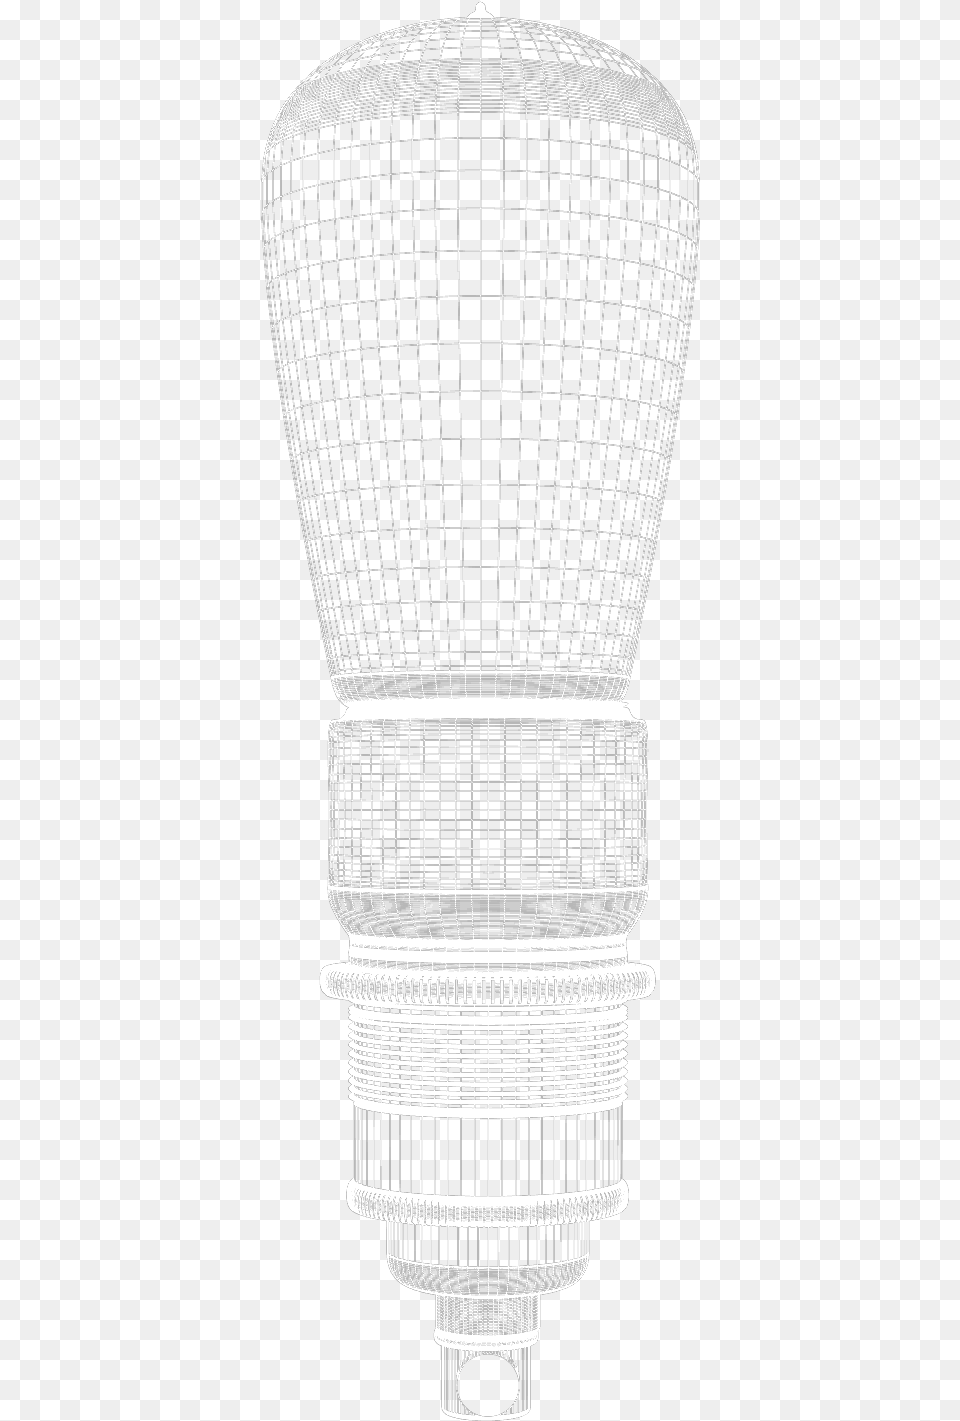 27 40 28 Eco Filament Lamp Wire1 4 Skateboard Deck, Architecture, Building, Tower, Cad Diagram Free Png